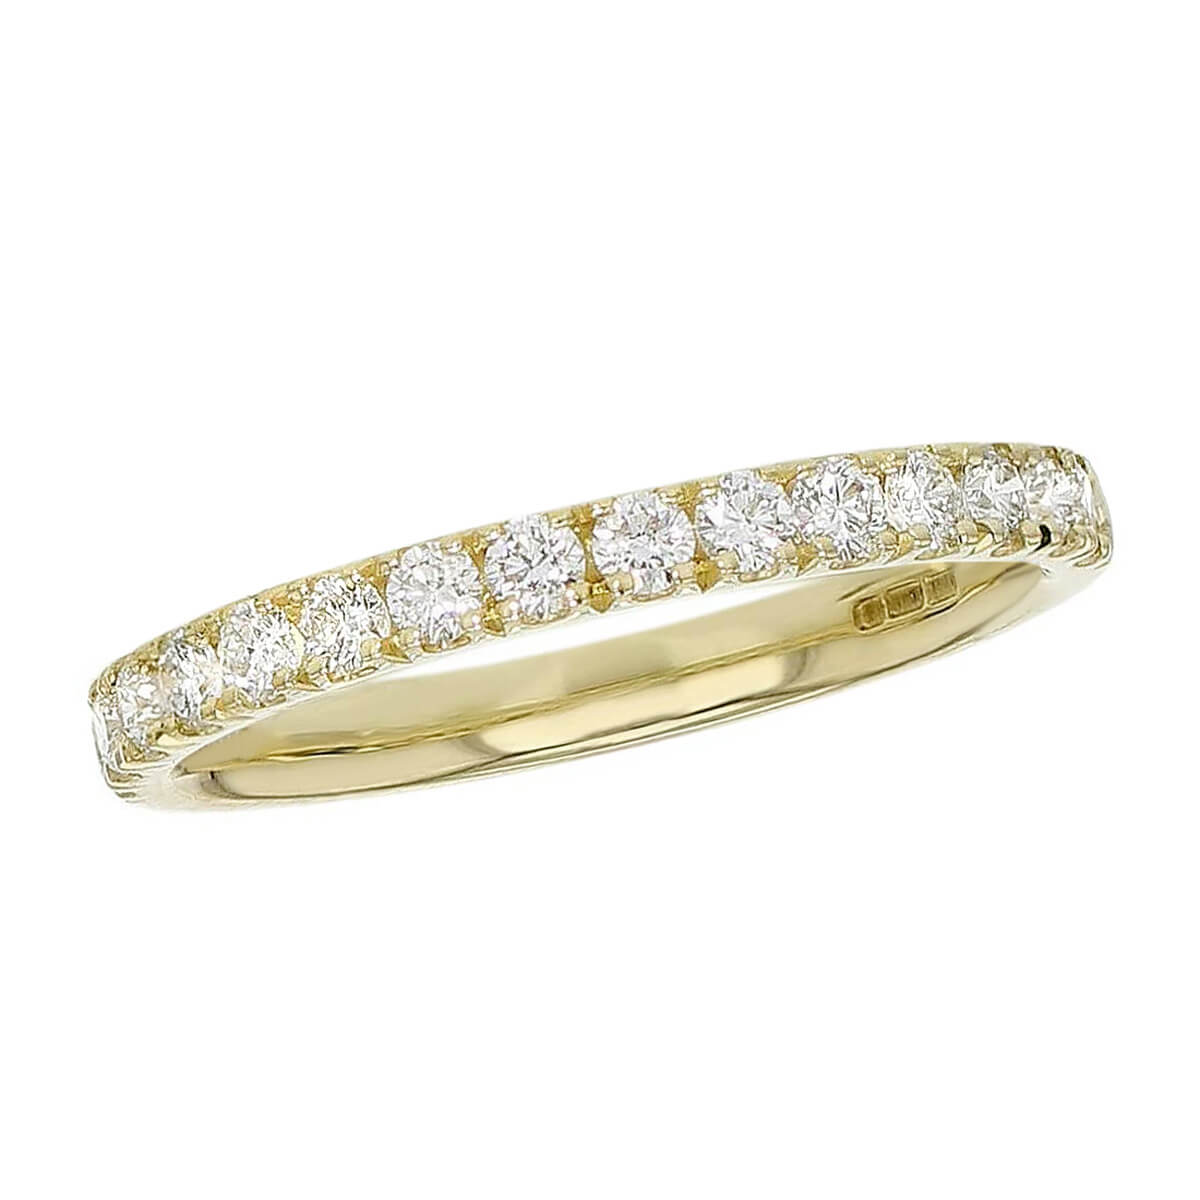 2.5mm wide 18ct yellow gold ladies round brilliant cut diamond eternity ring, diamond set wedding ring, woman’s bridal, personalised engraving, court profile, comfort fit, precious jewellery by Faller of Derry/ Londonderry, jewelry, claw set, 18kt